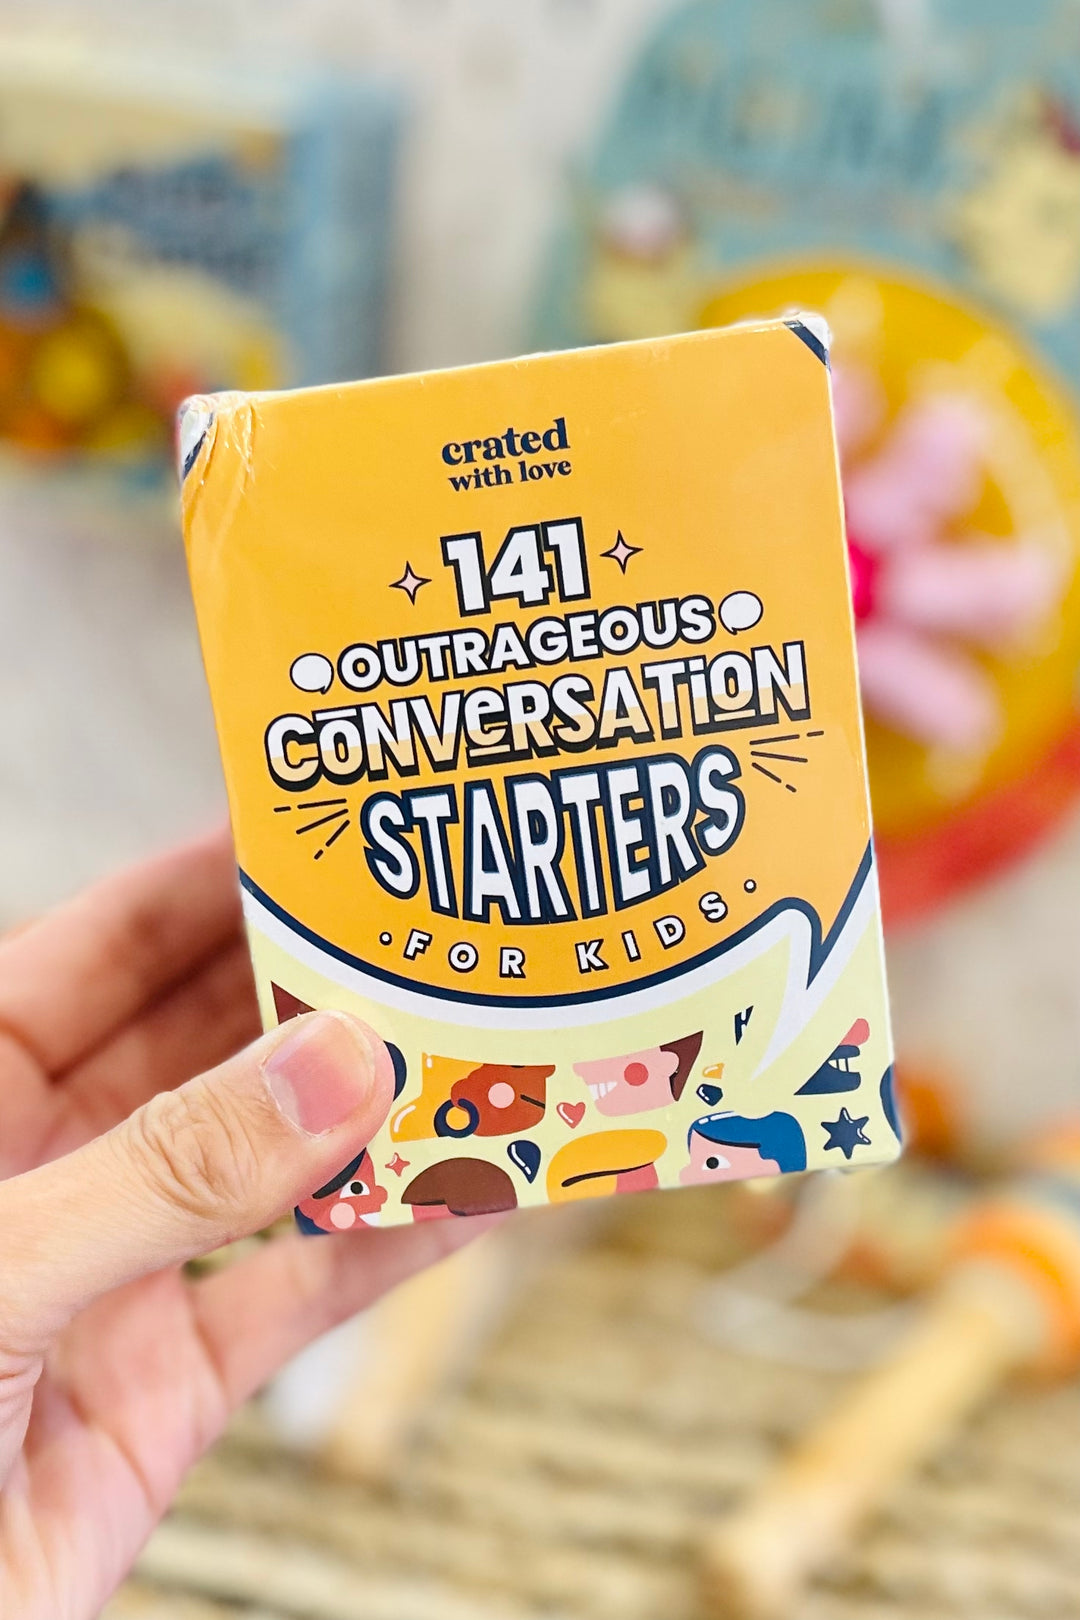 141 Outrageous Conversation Starters for Kids